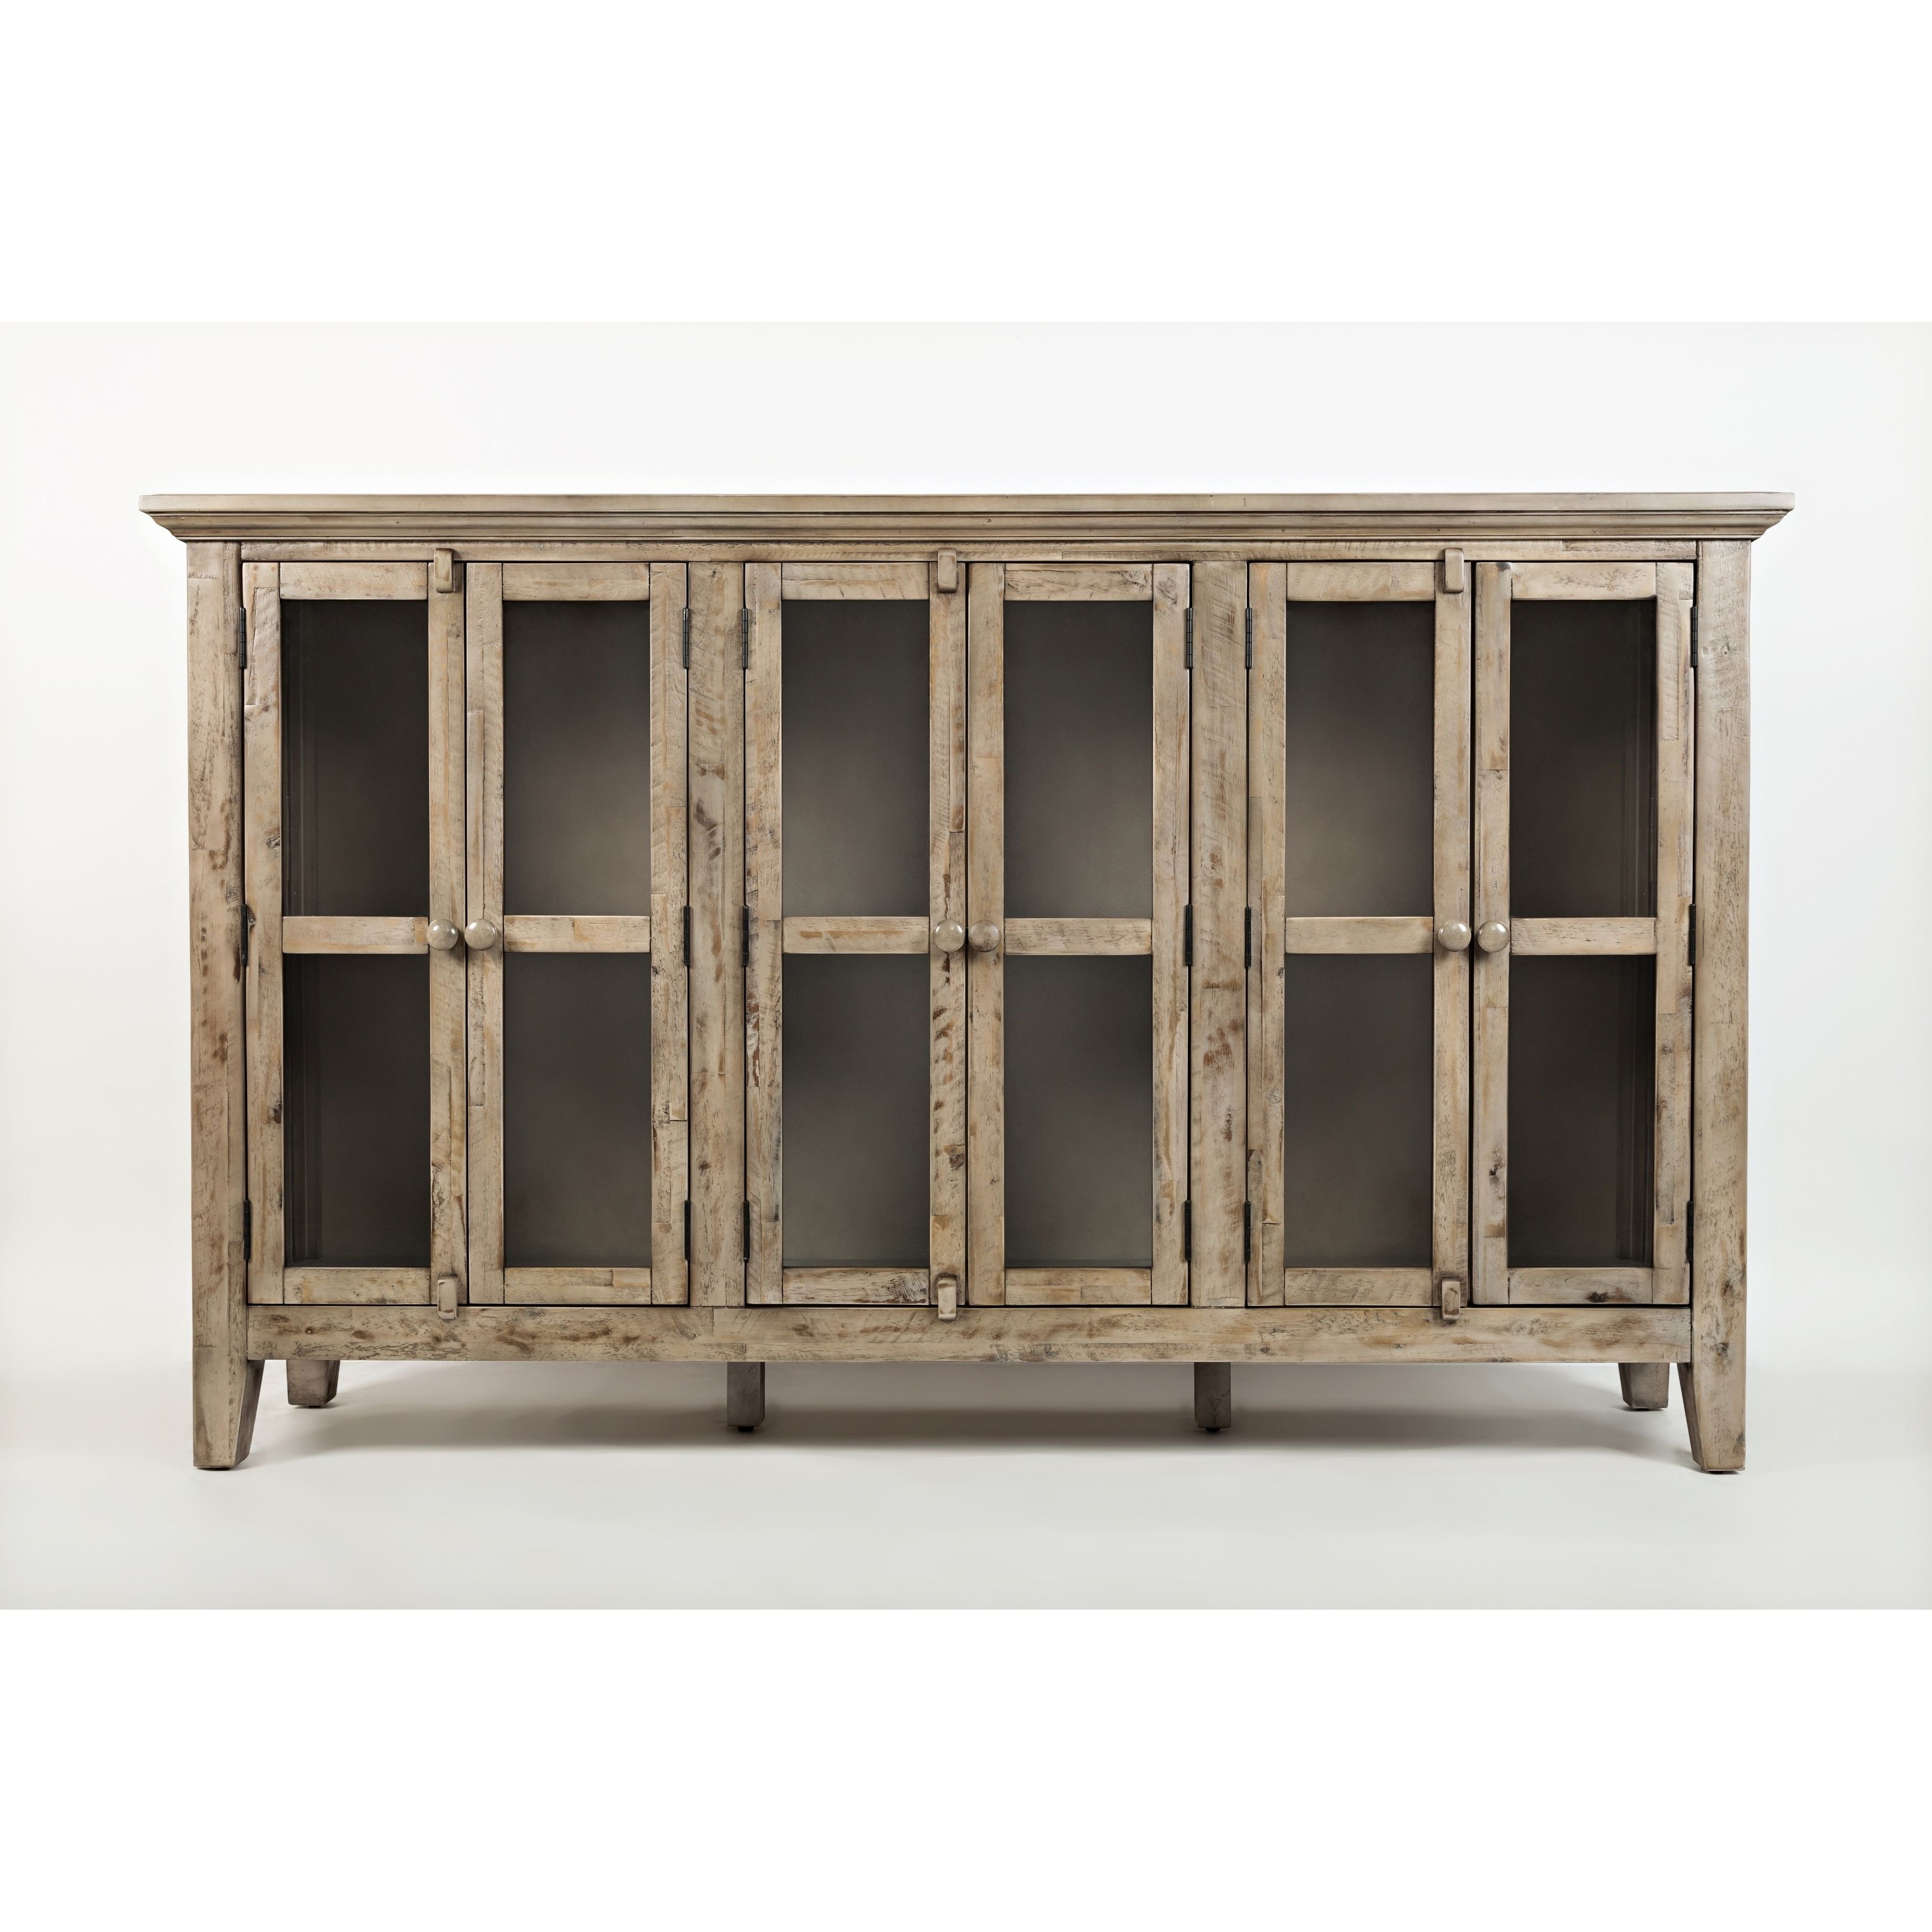 Wooden Accent Cabinet With 6 Glass Doors, Weathered Gray Inside Eau Claire 6 Door Accent Cabinets (View 12 of 20)